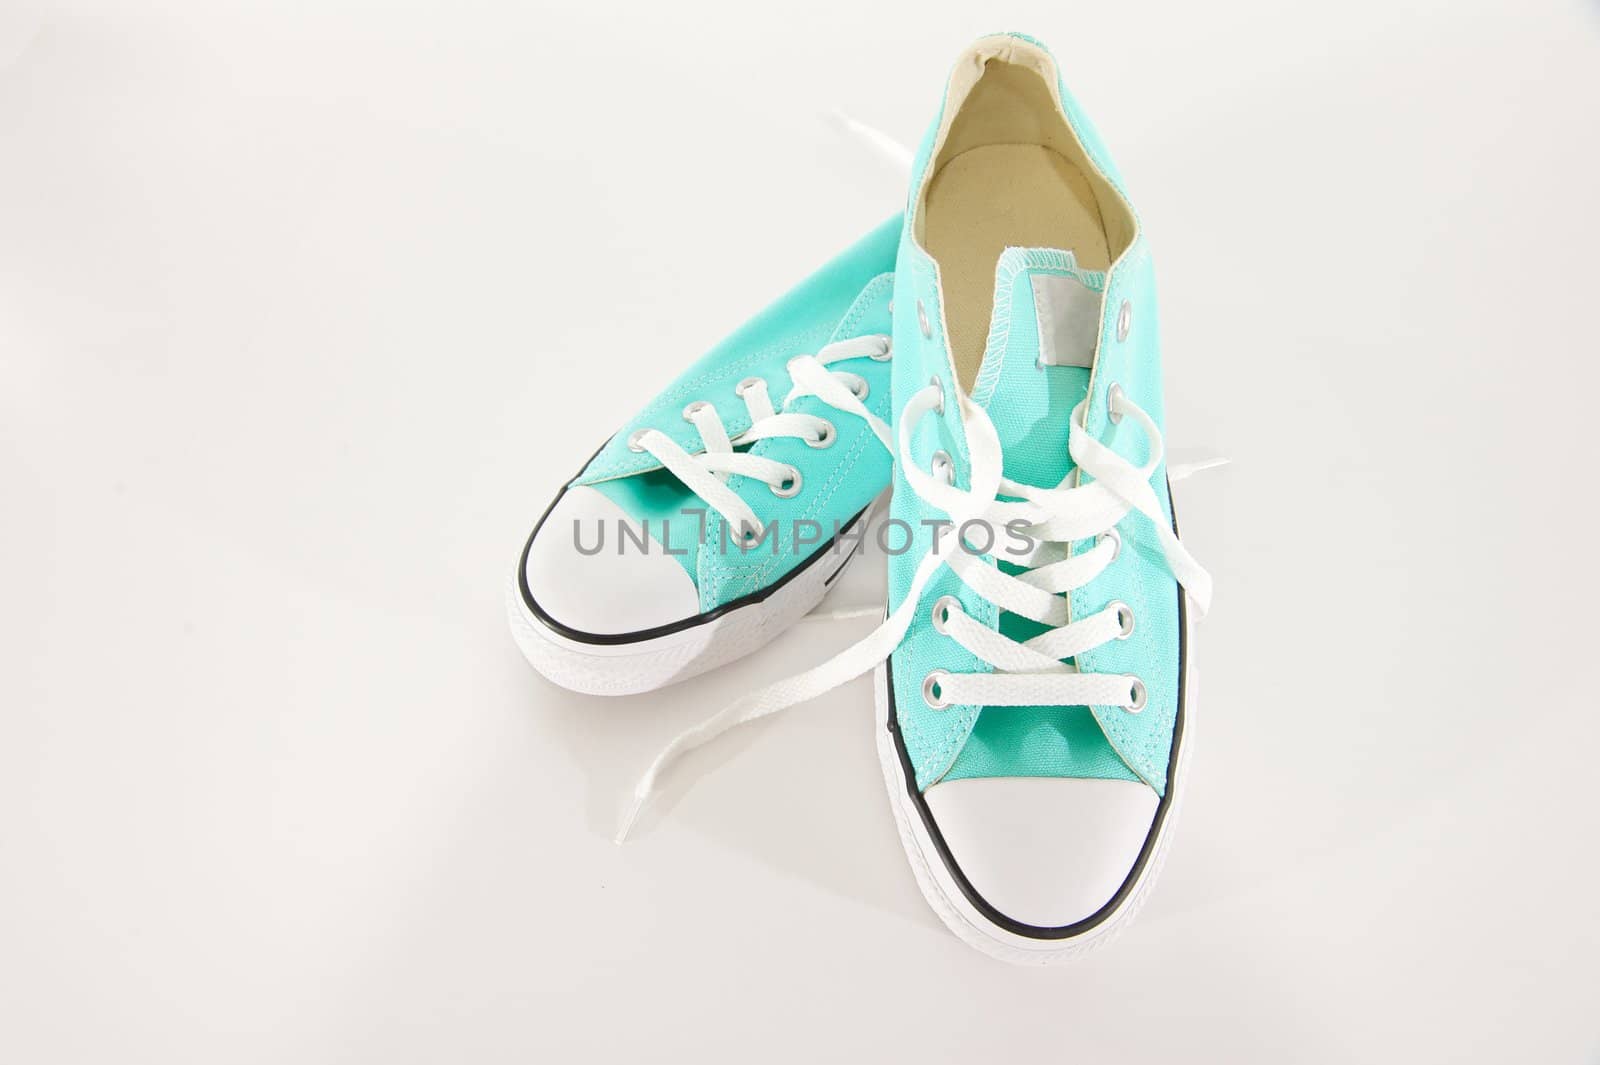 Pair of turquoise and white sneakers with laces on a blank background